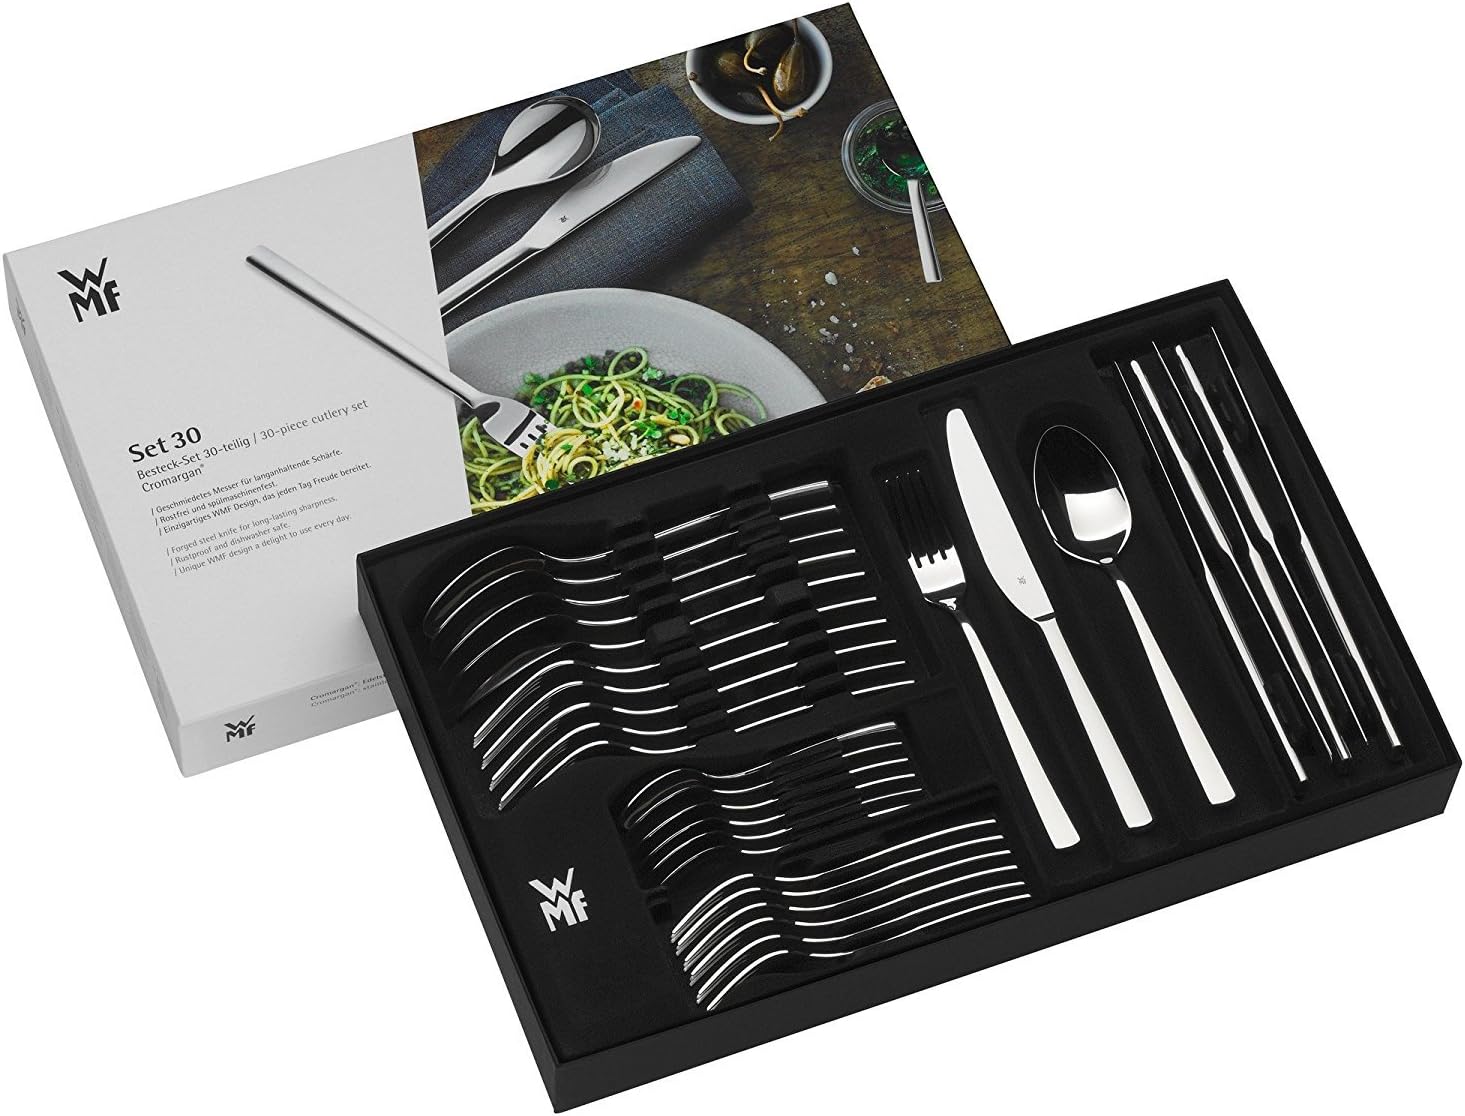 WMF Amsterdam Cutlery Set for 6 People, 30 Pieces, Monobloc Knife, Polished Cromargan Stainless Steel, Shiny, Dishwasher Safe